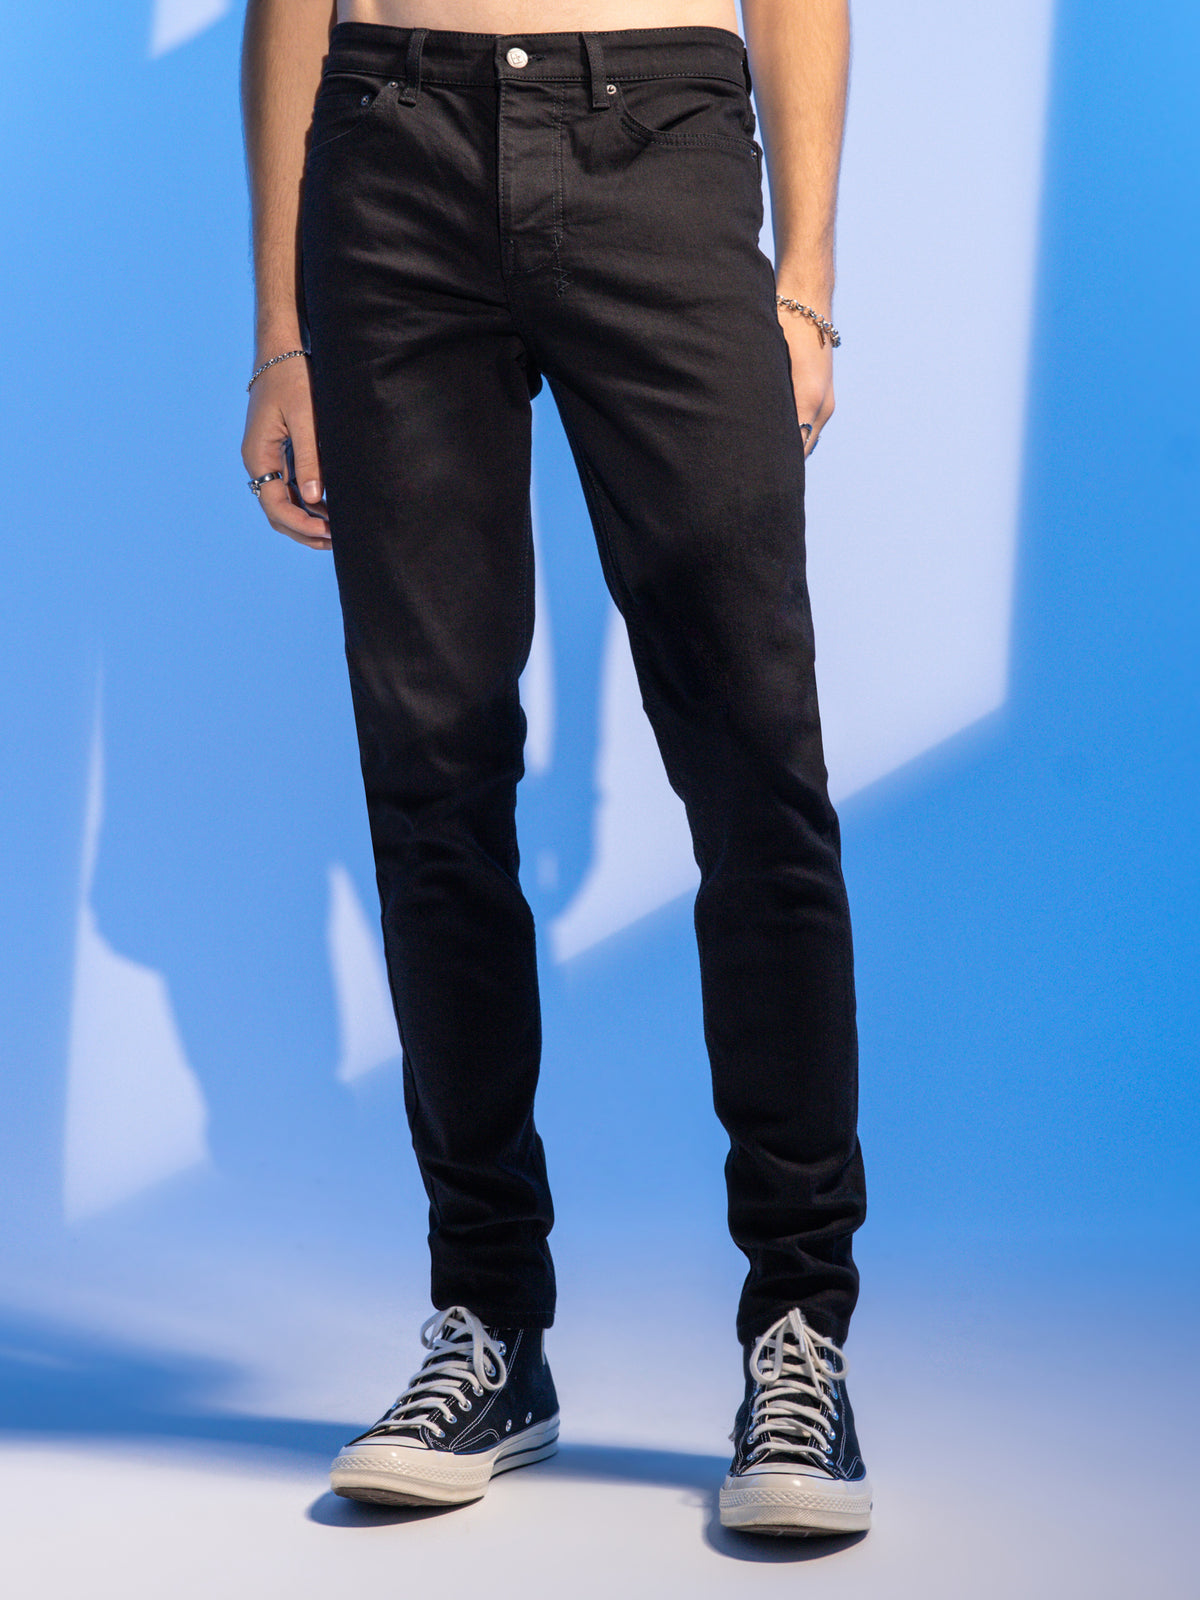 Chitch Slim Fit Jeans in Laid Back Black